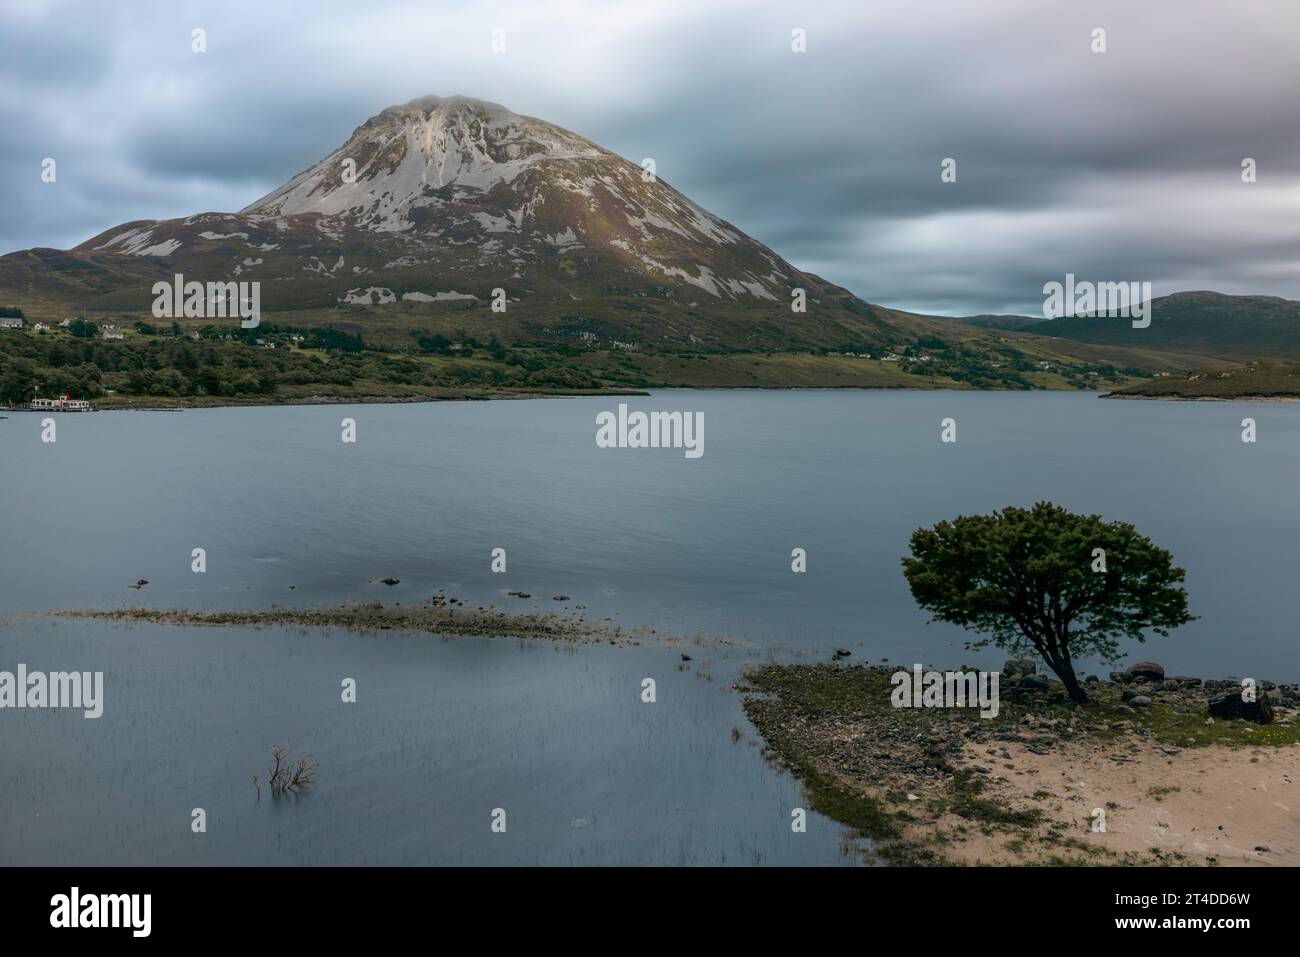 Dunlewey Lough in Ireland, a picturesque lake nestled between the majestic Mount Errigal and the Poisoned Glen. Stock Photo